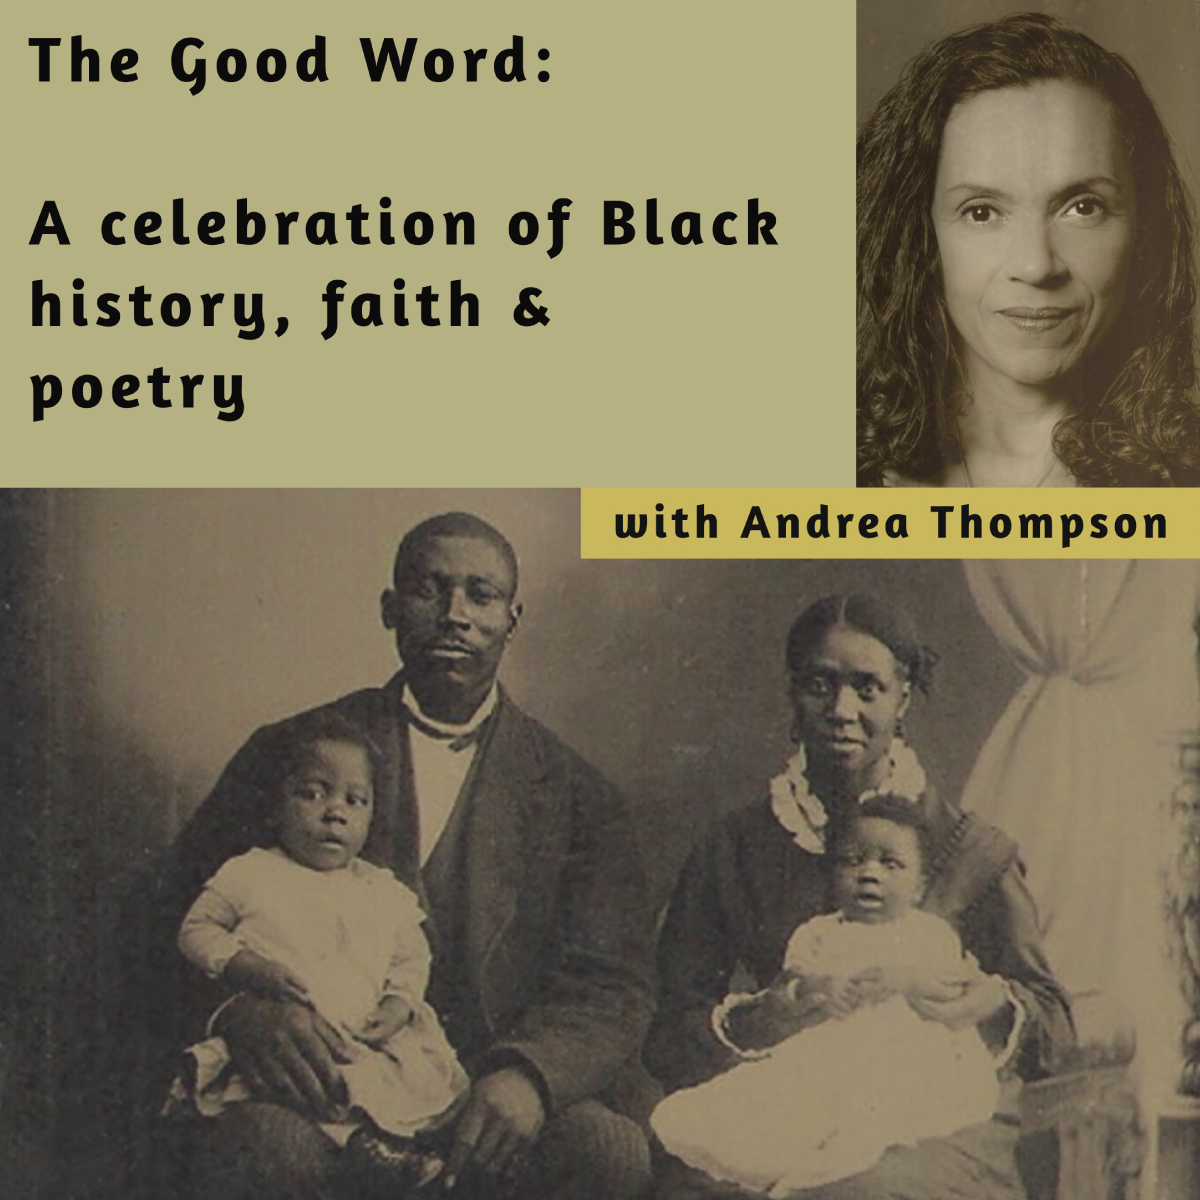 The Good Word; A Celebration of Black history, faith and Poetry. Flyer.